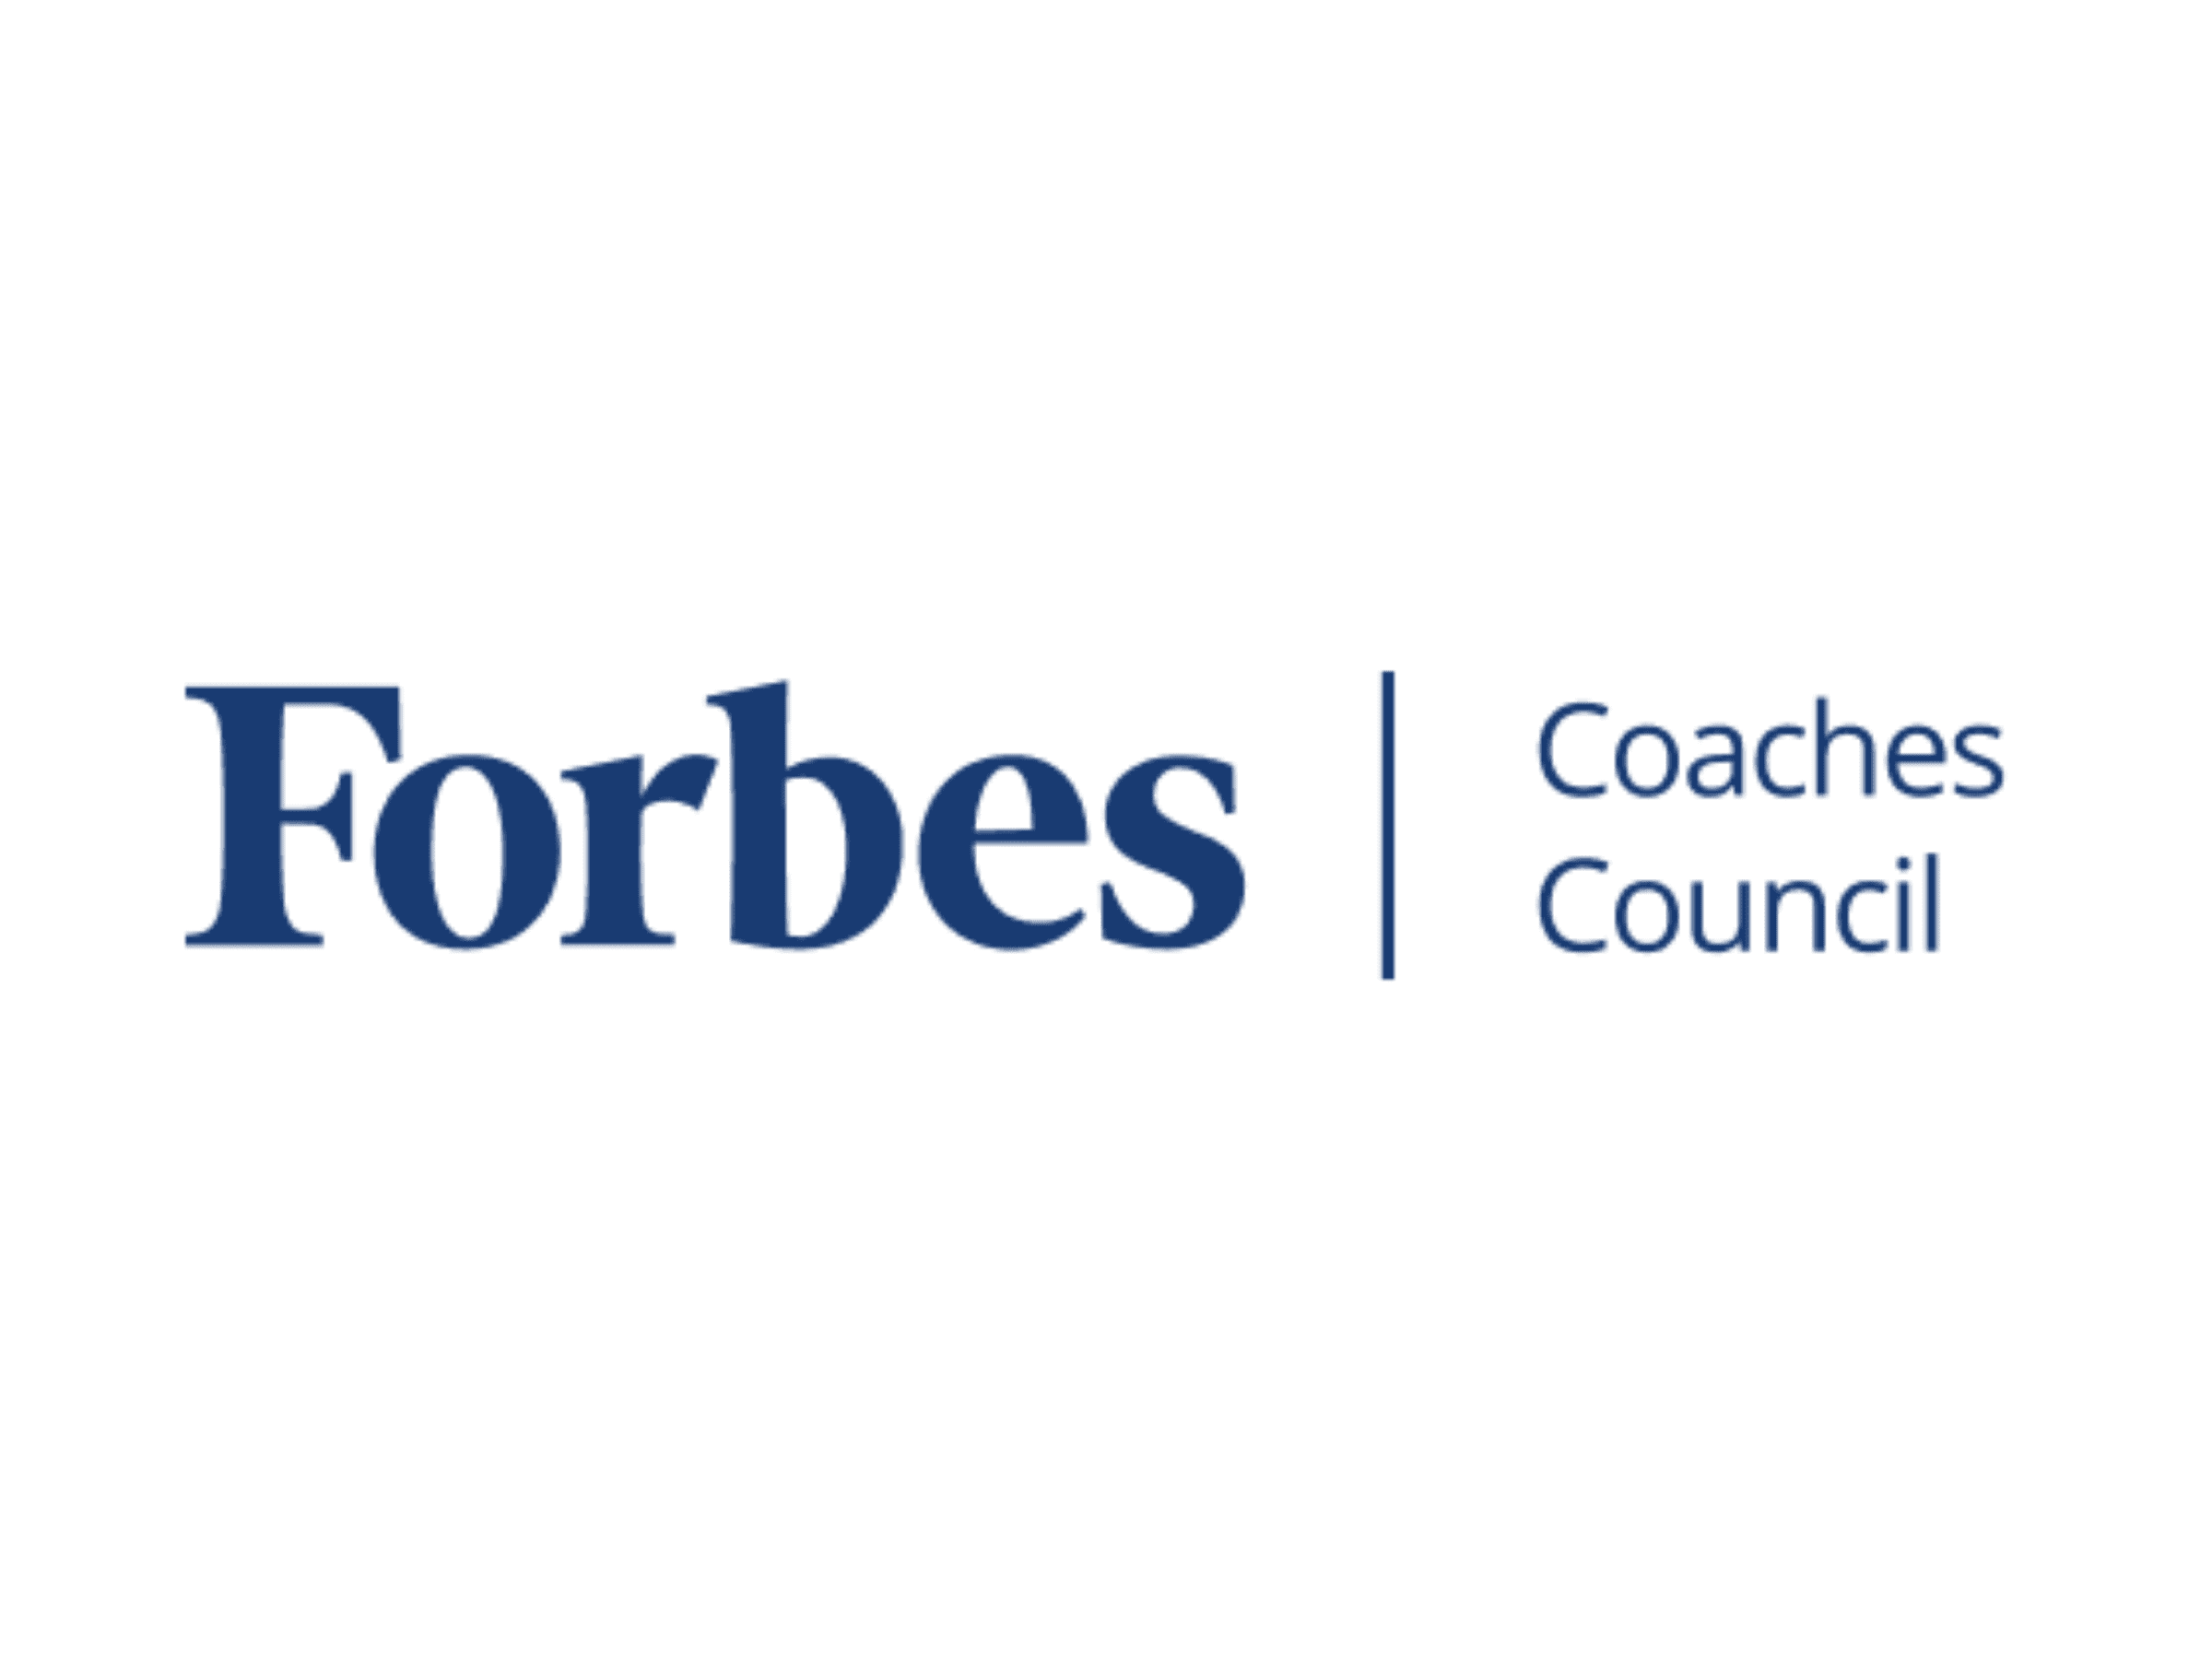 Dan Silvert accepted into Forbes Coaches Council